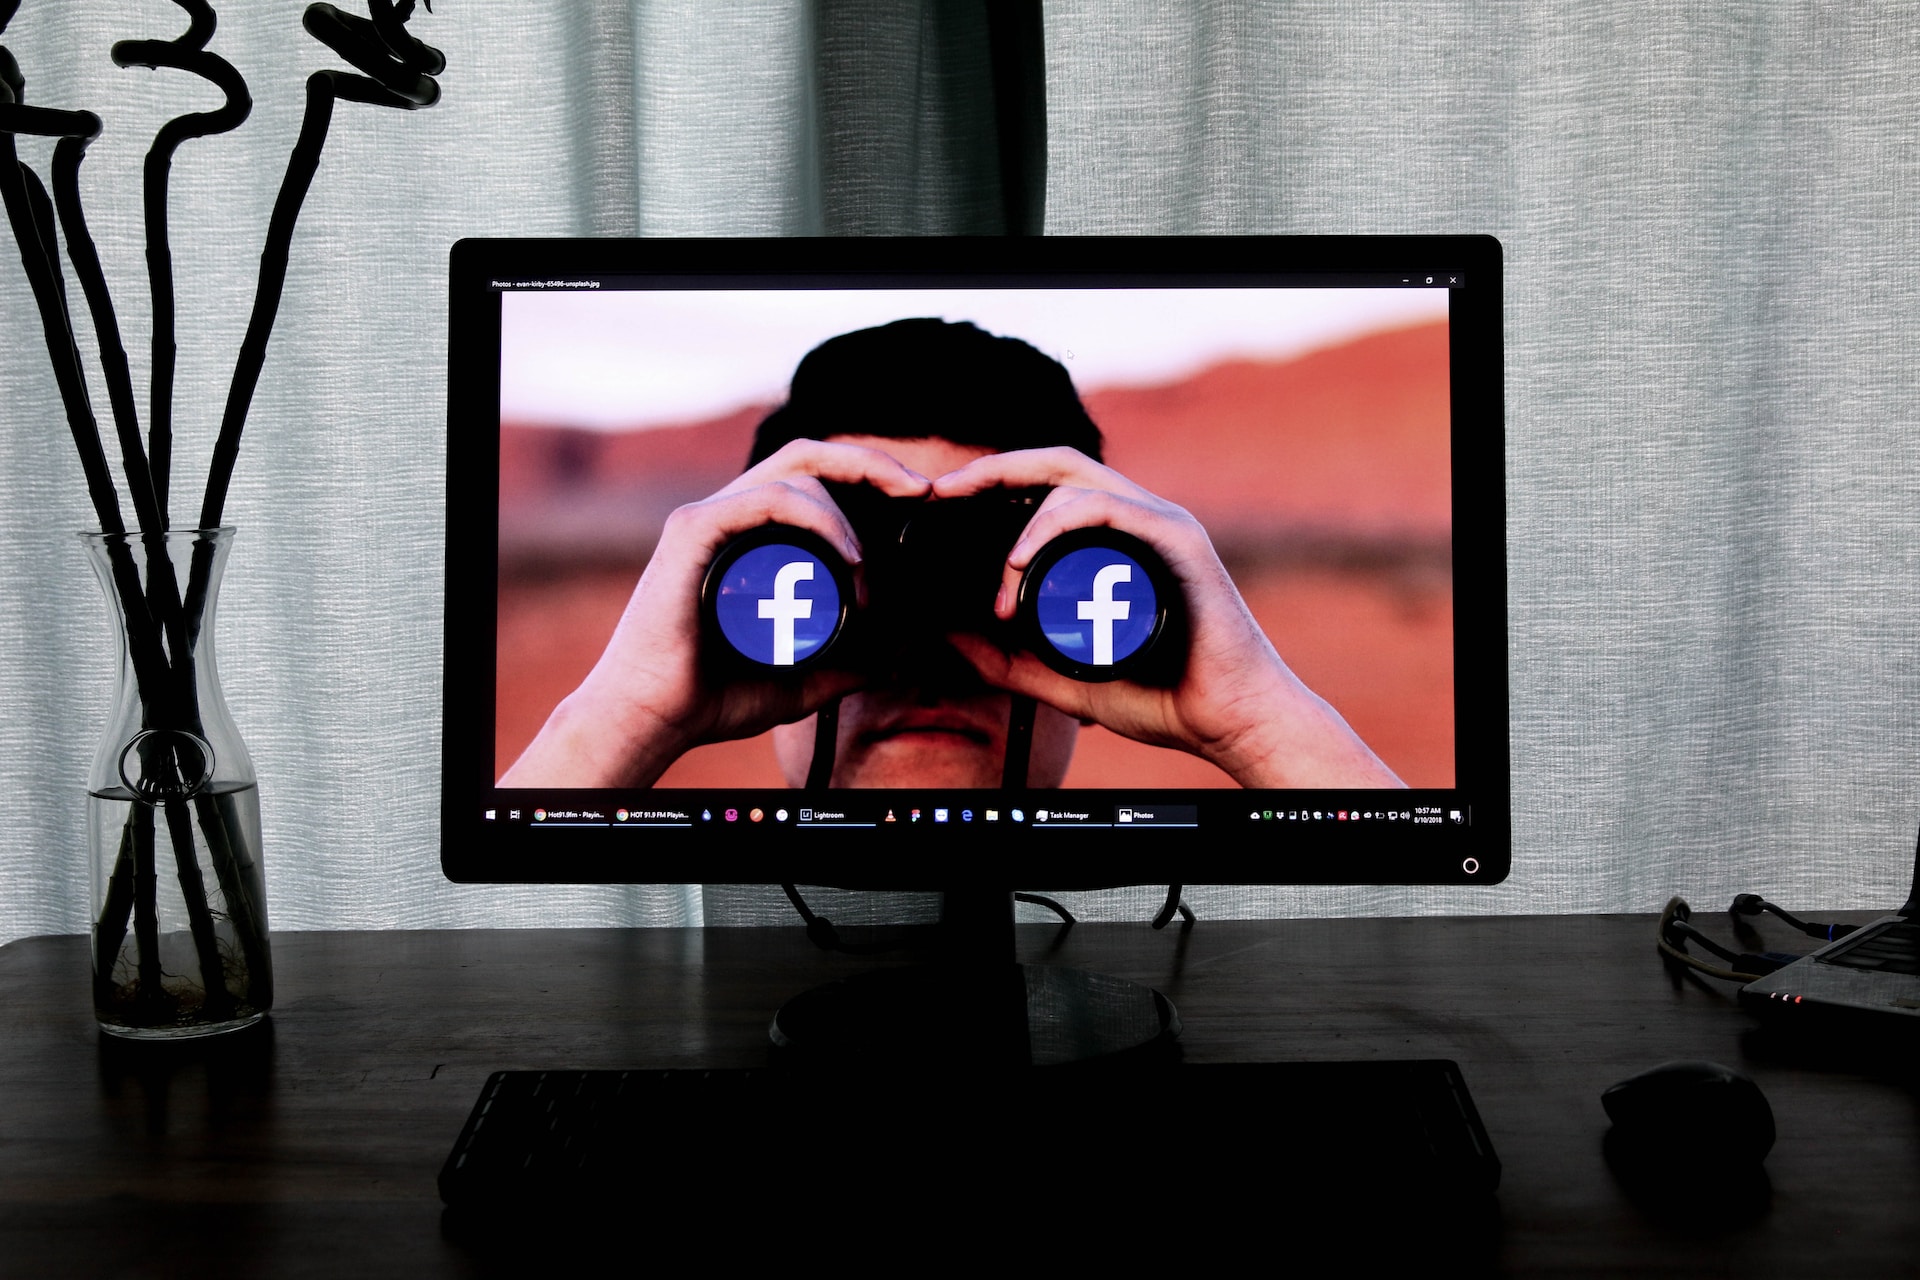 How to Find an IP Address of a Fake Facebook Account